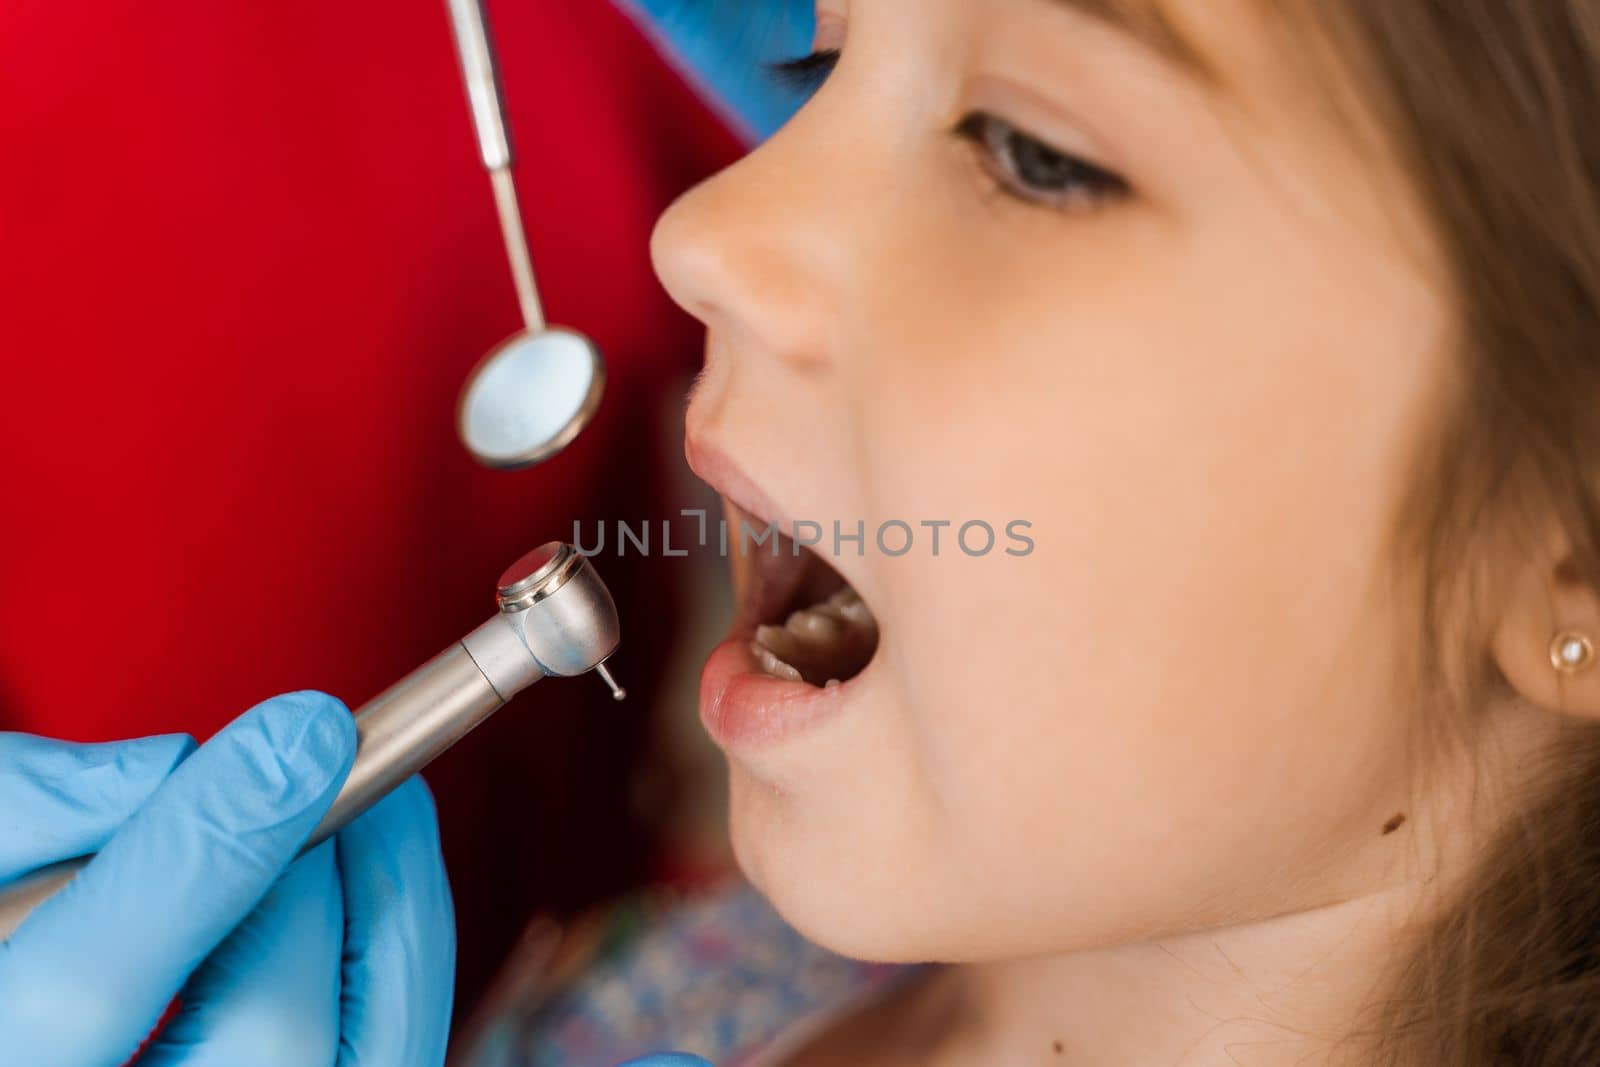 Dental drill close-up. Child dentist drilling teeth of kid girl in dentistry clinic. Teeth treatment. Dental filling for child patient